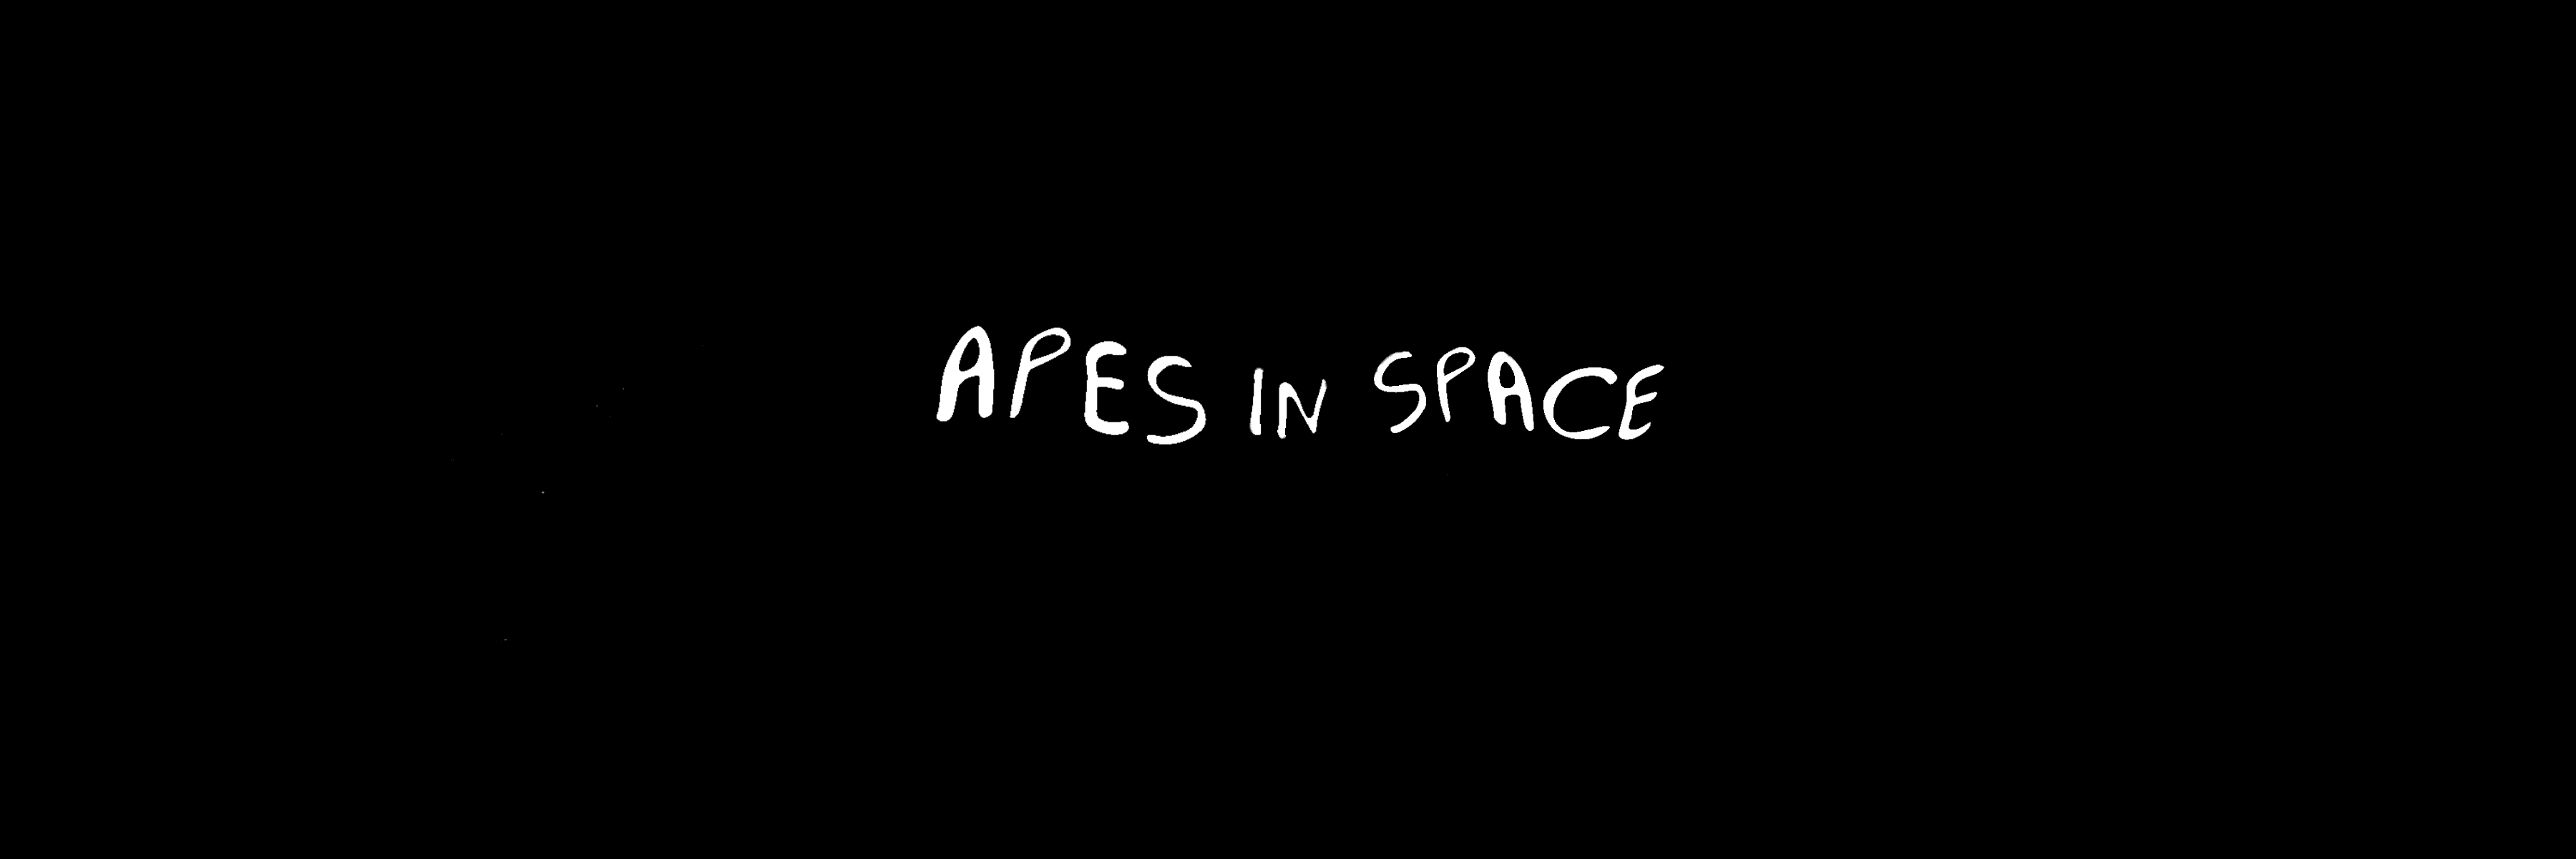 Apes In Space NFT